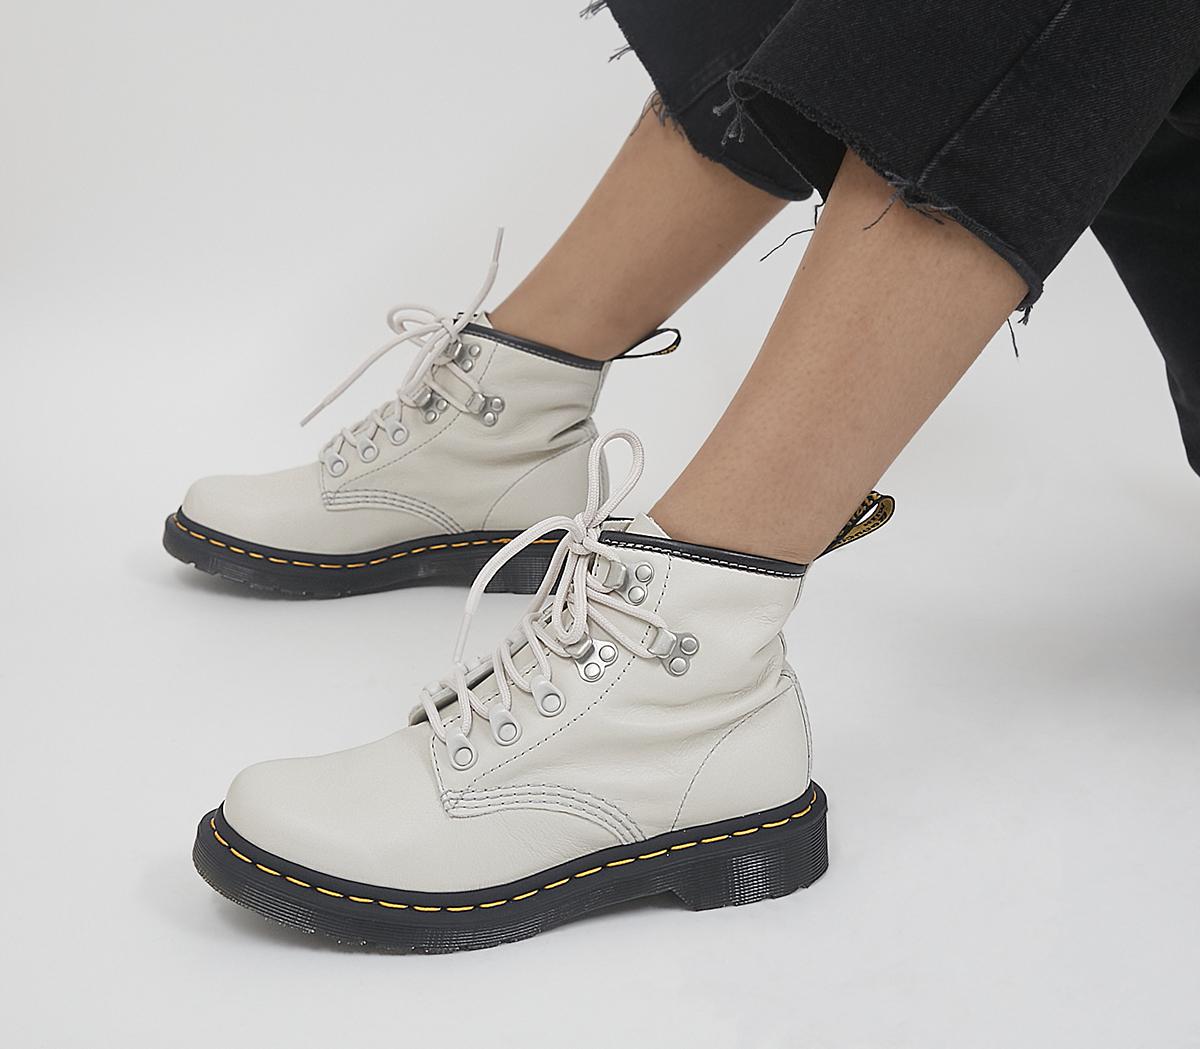 Dr. Martens 101 Hardware Boots White - Women'S Ankle Boots